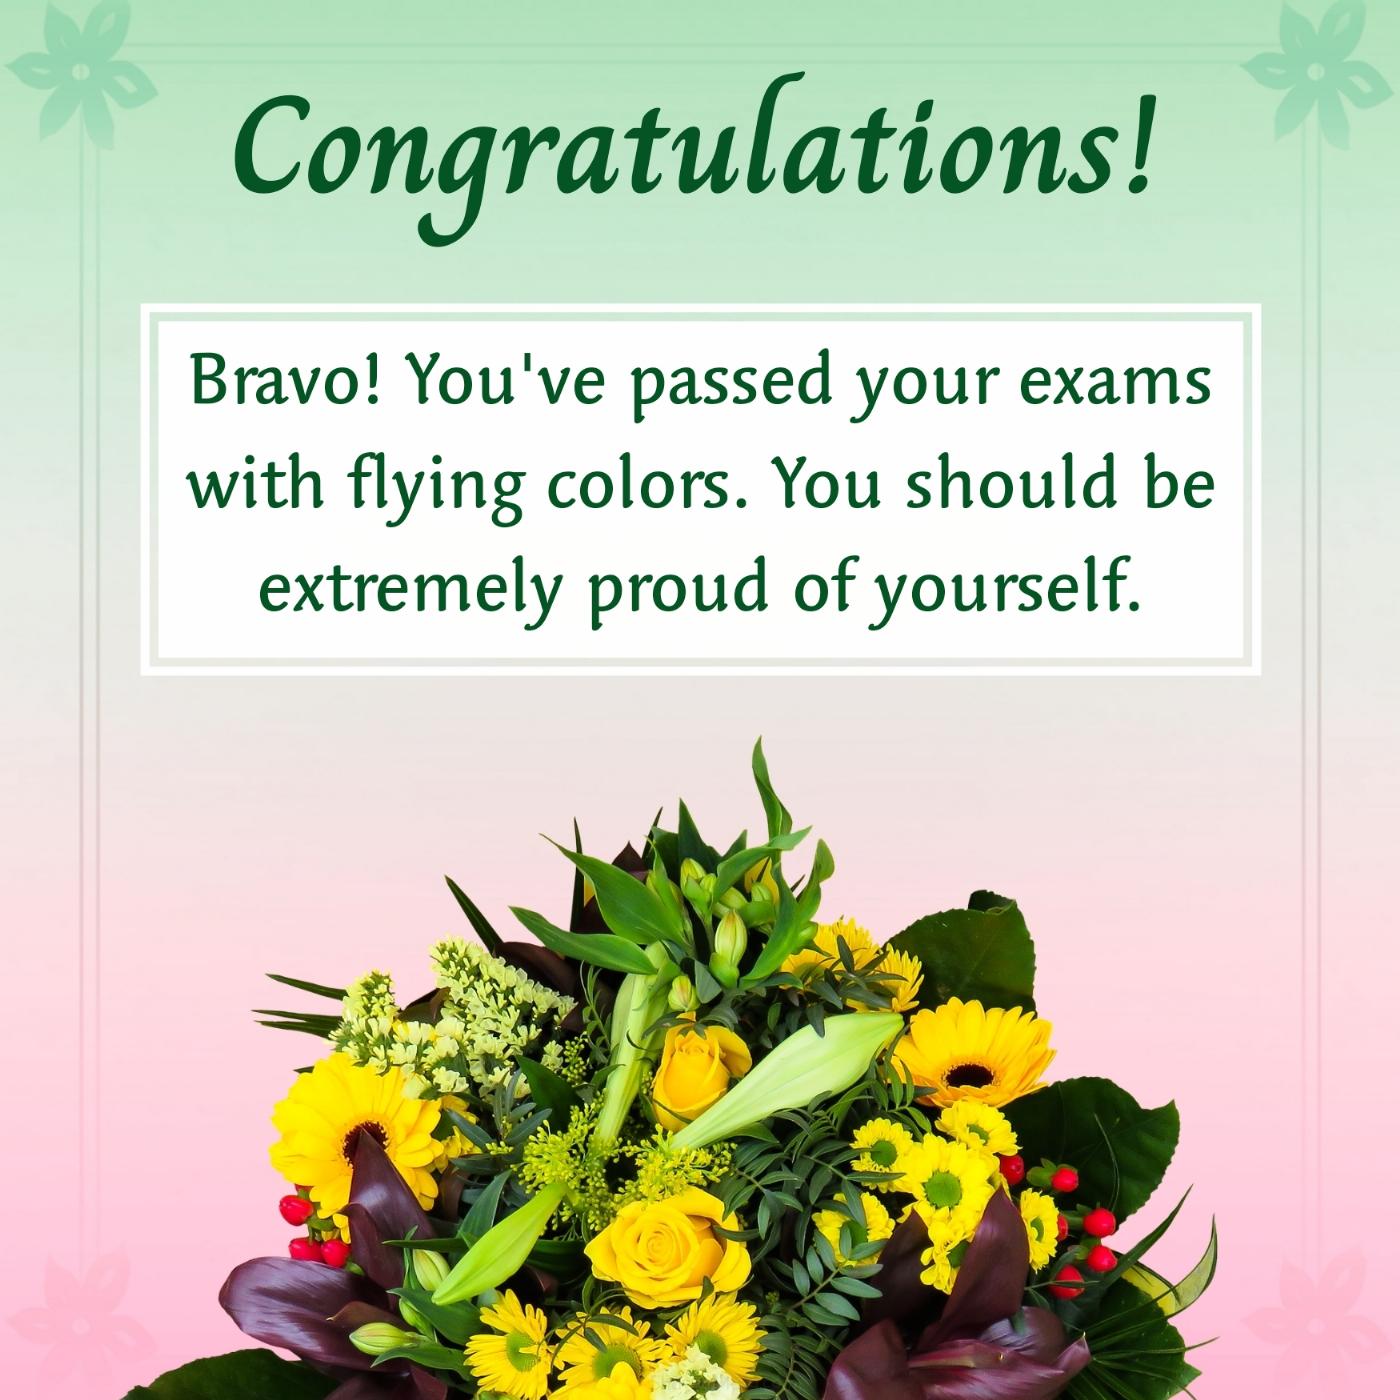 Bravo You've passed your exams with flying colors